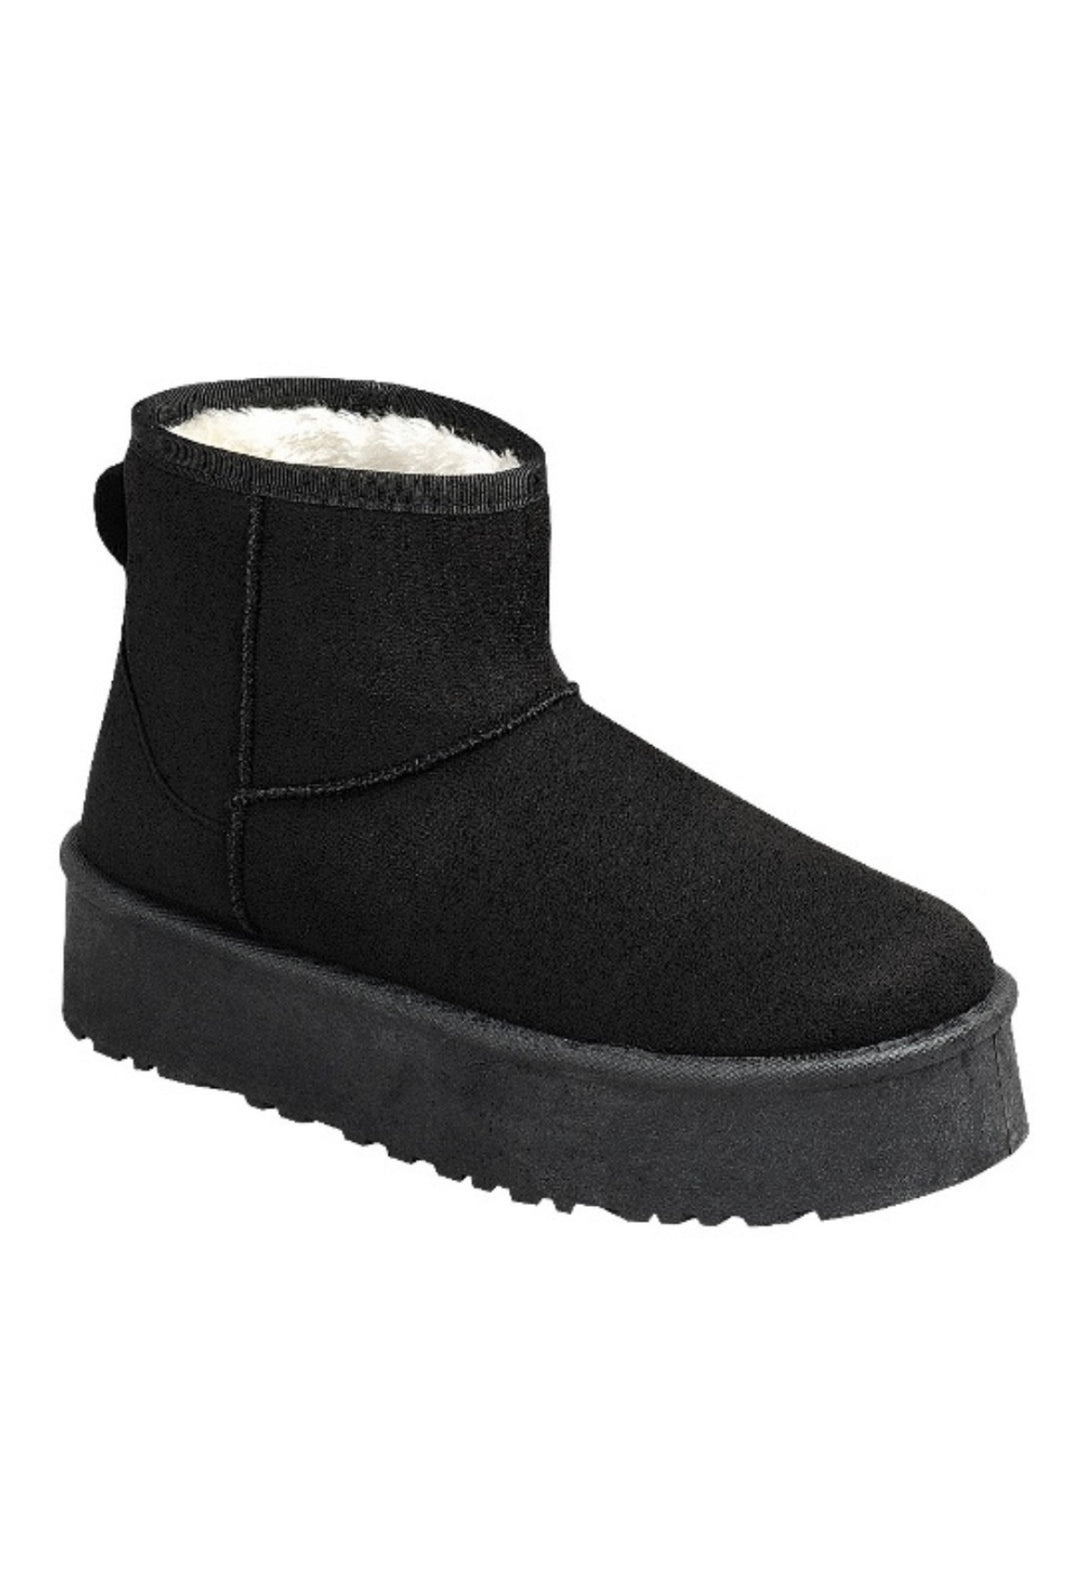 Ugg style Cozy Slipper Boots